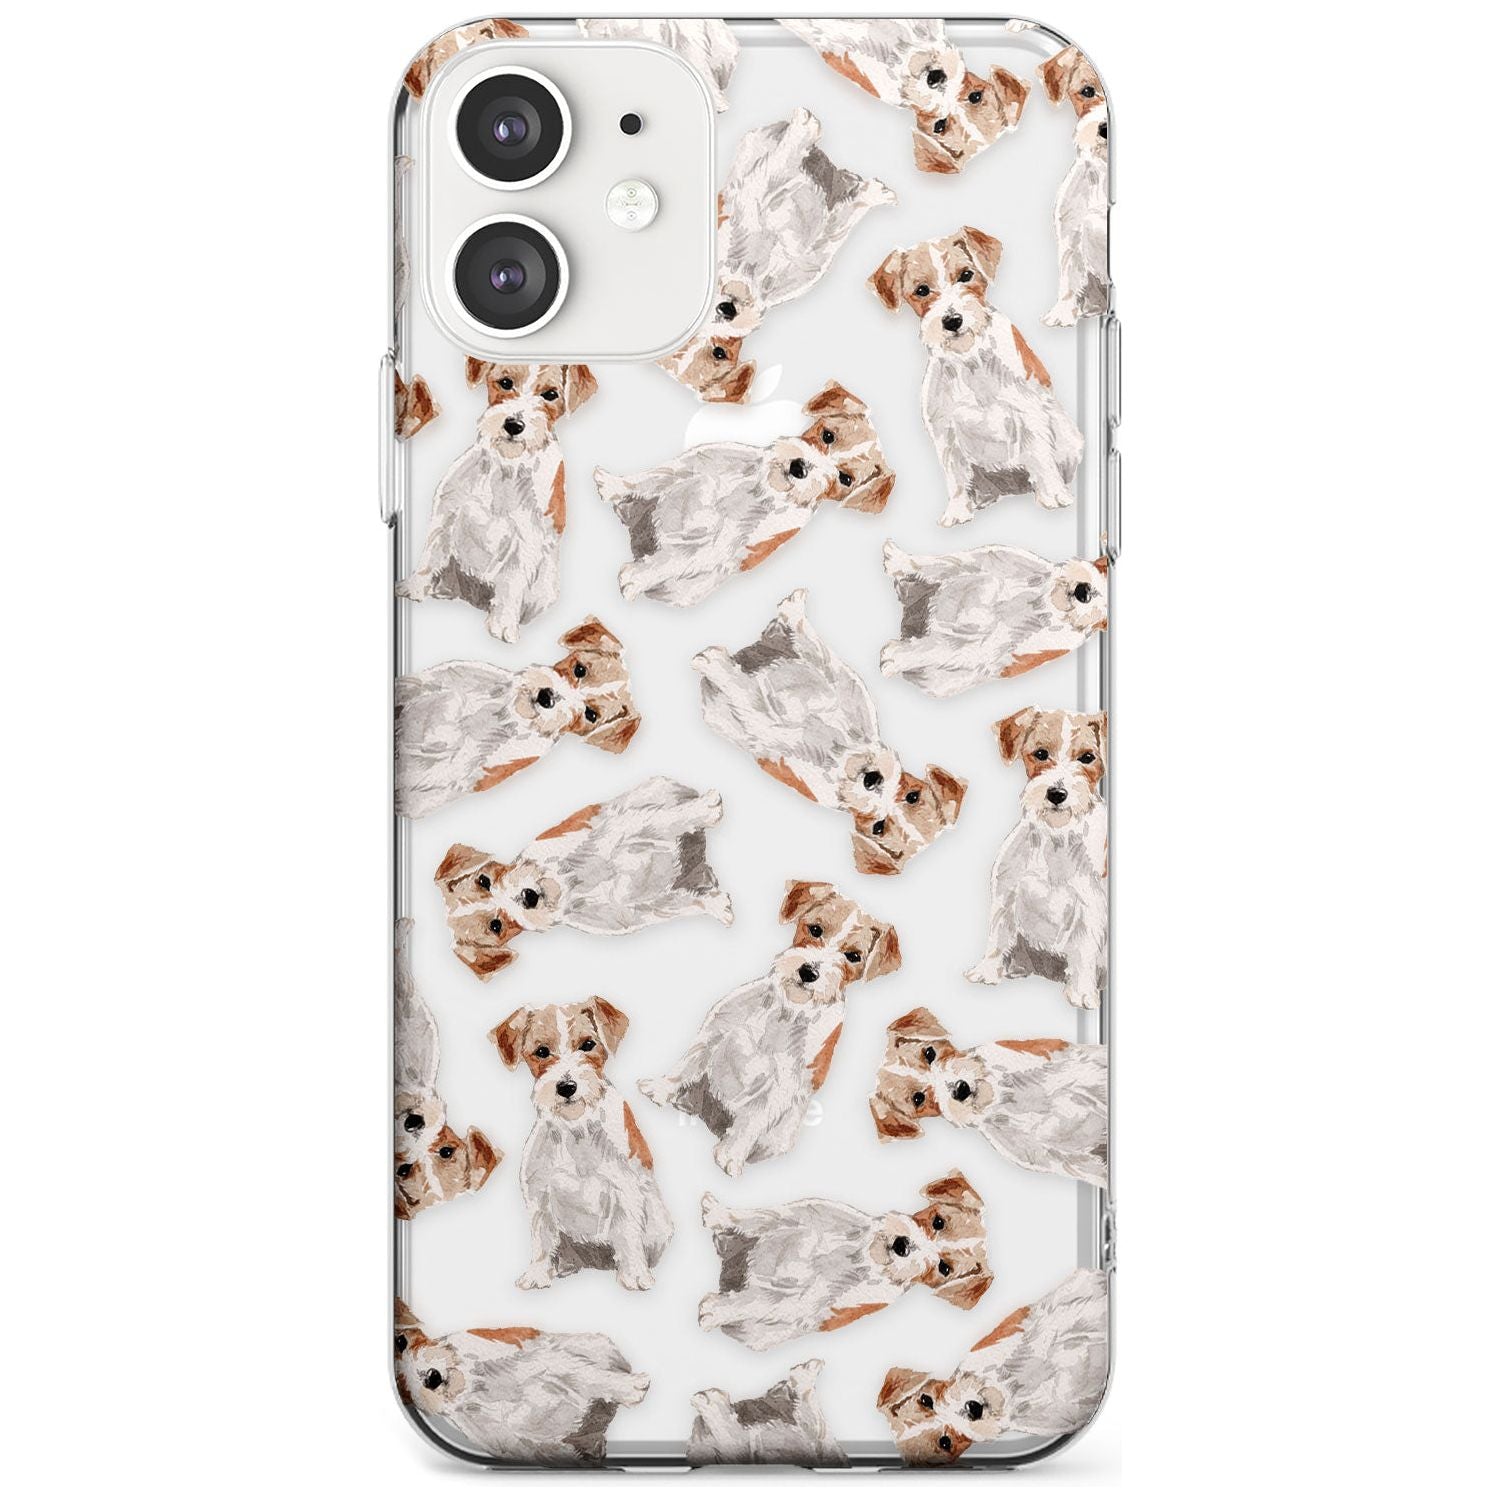 Wirehaired Jack Russell Watercolour Dog Pattern Slim TPU Phone Case for iPhone 11